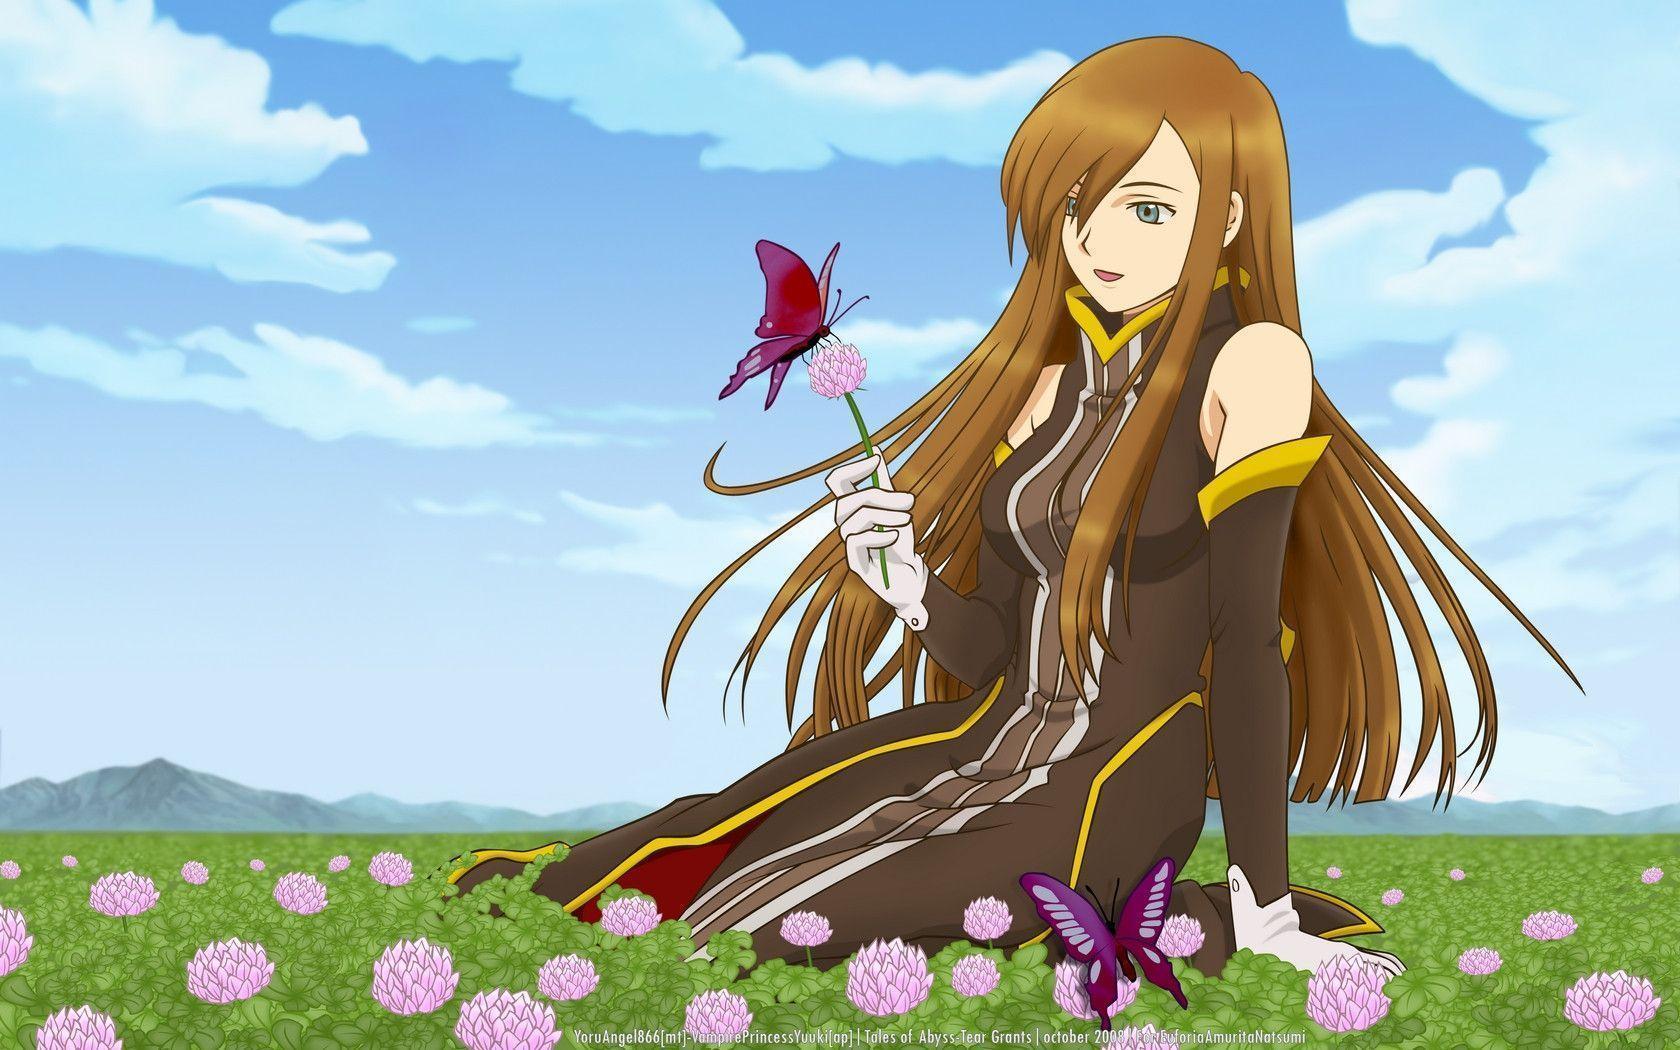 Pix For > Tales Of The Abyss Wallpaper